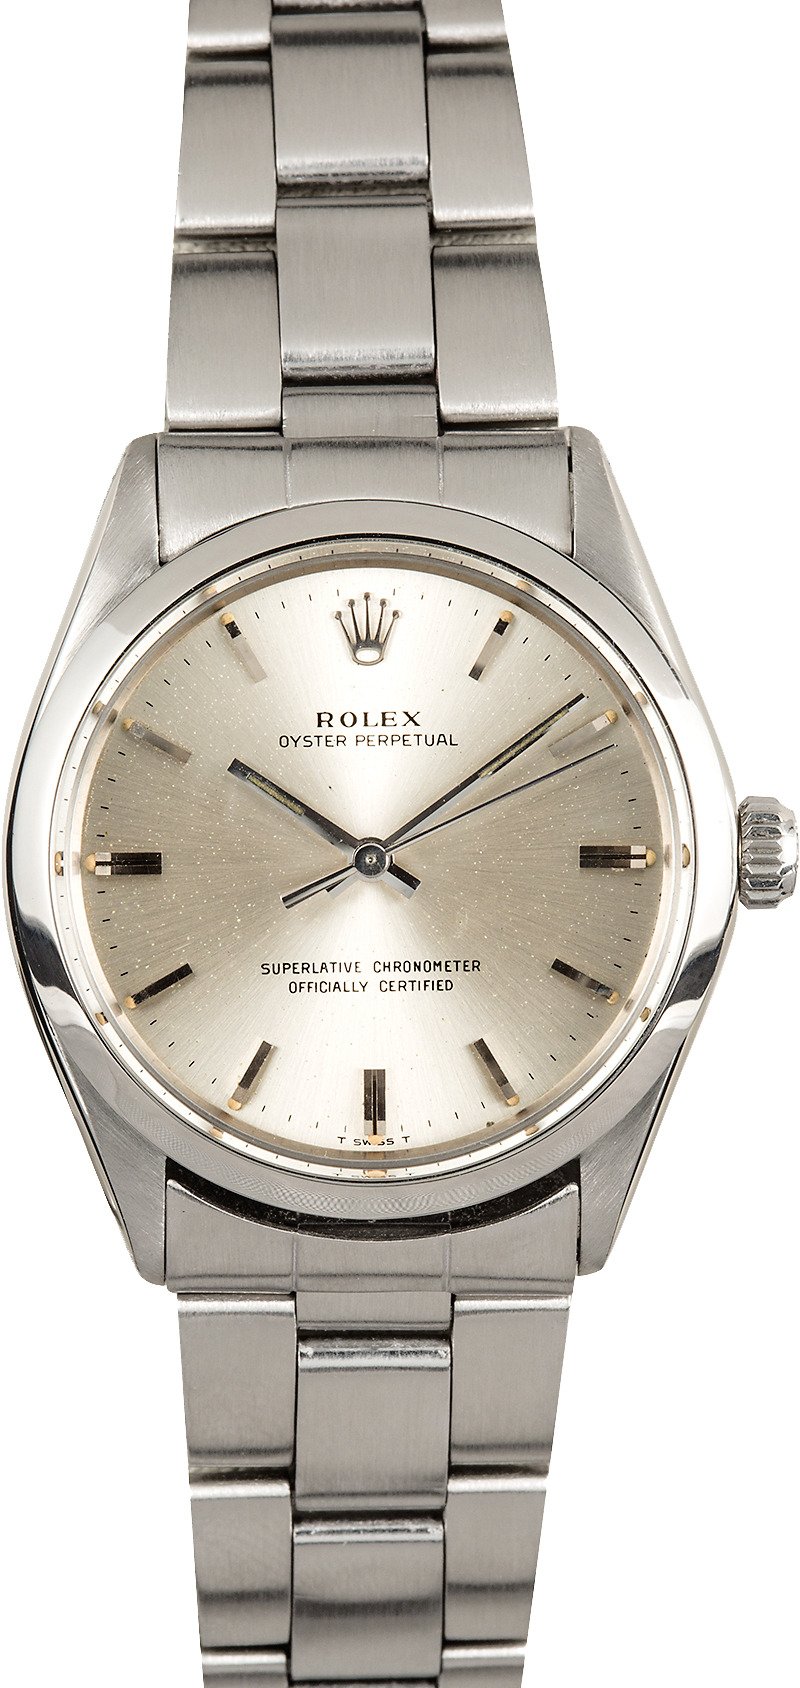 Vintage Rolex Oyster Perpetual - Bob's 